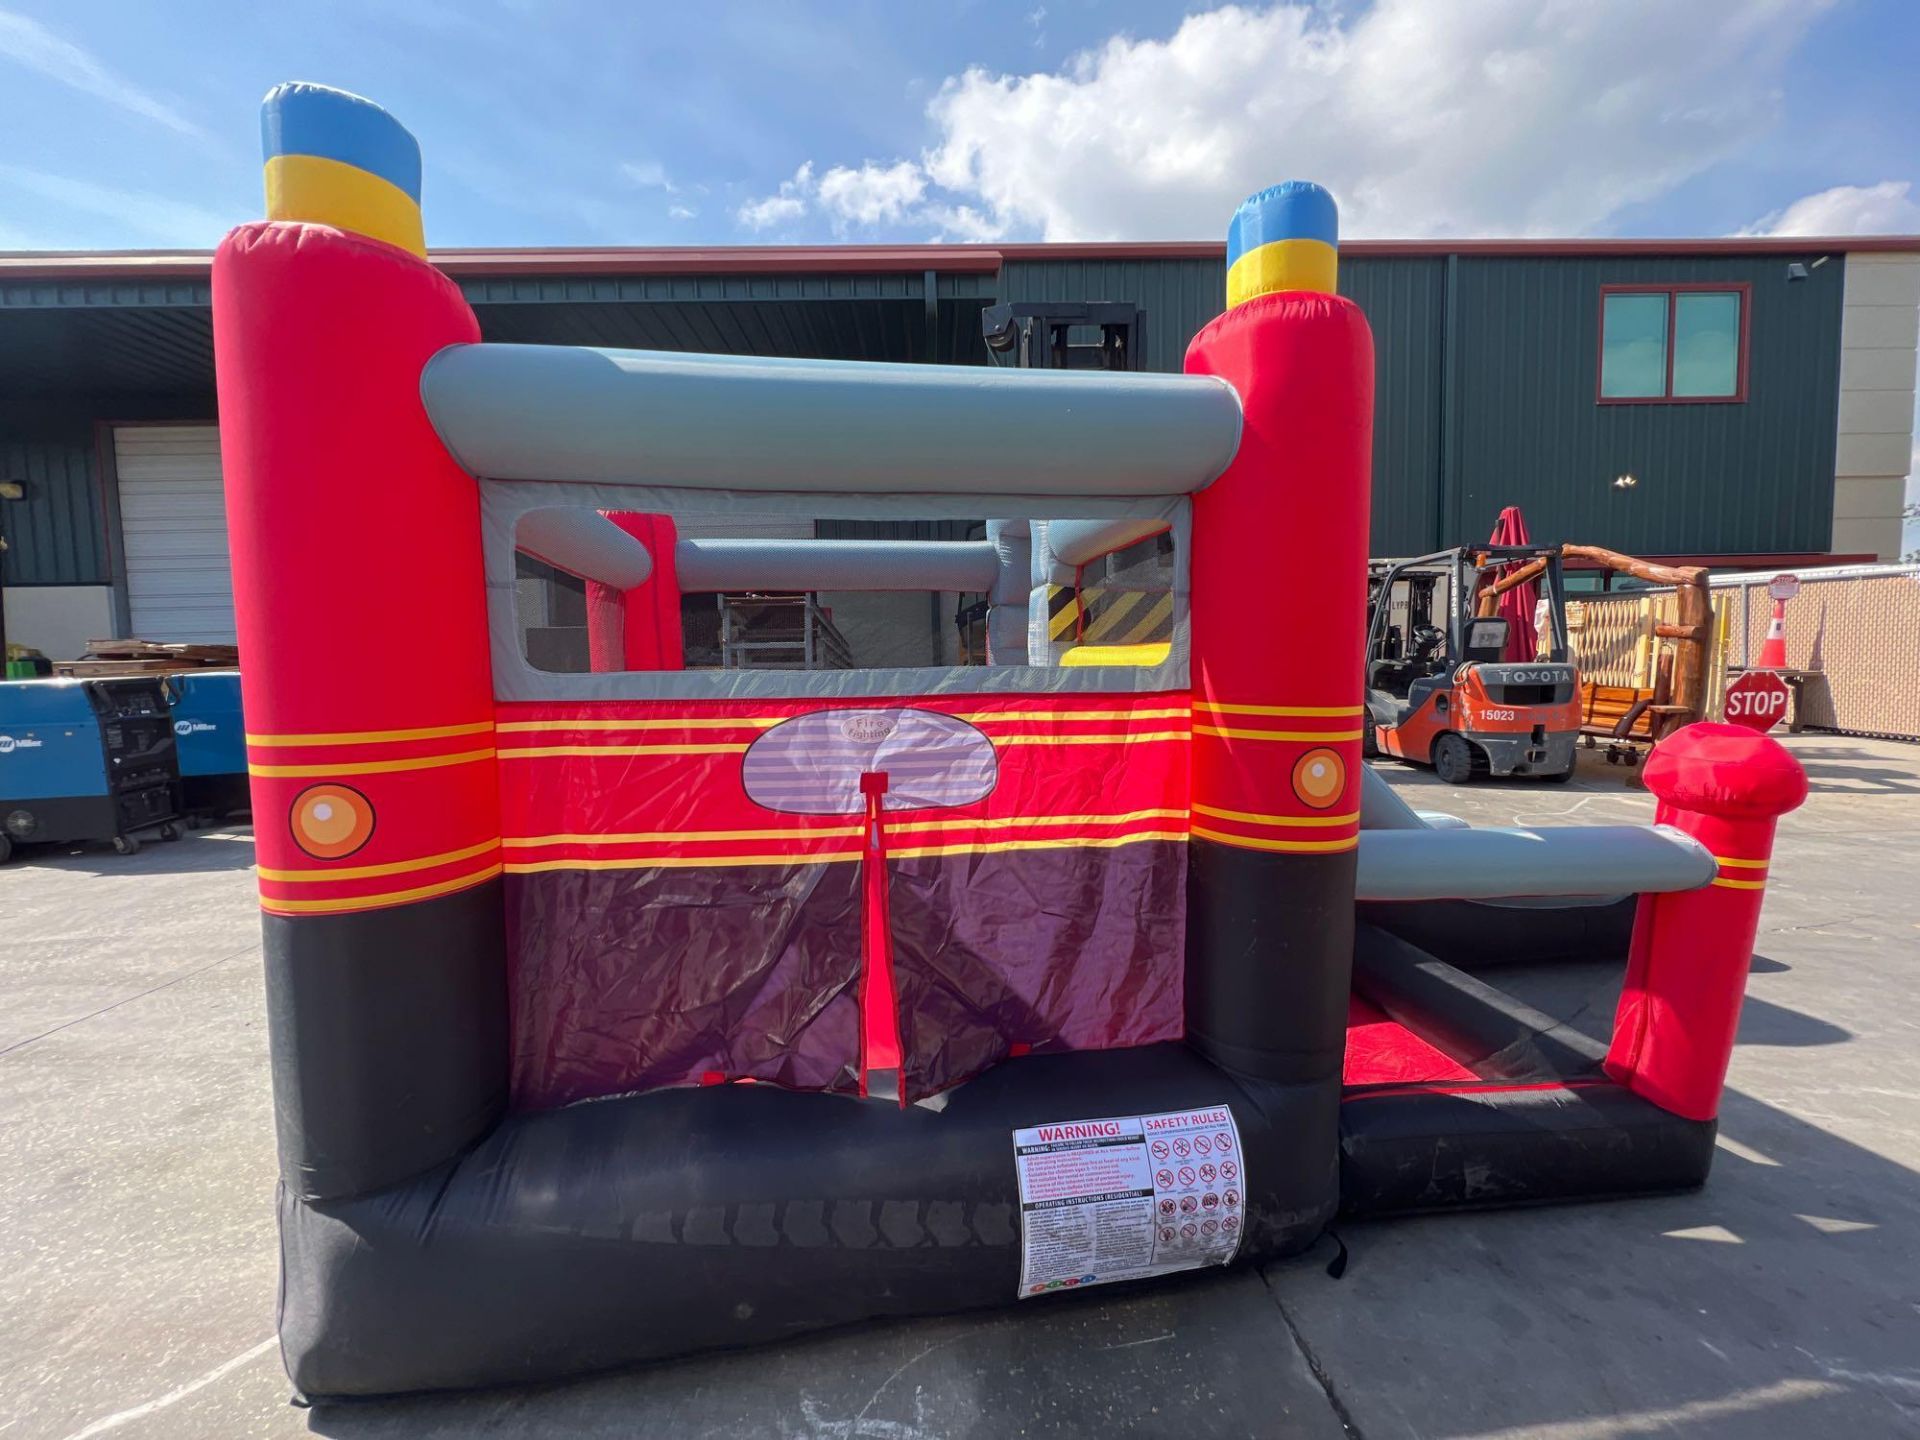 UNUSED BLOW-UP BOUNCY FIRE STATION PLAY YARD WITH SLIDE, VELCRO DARTS, BALLS, STAKES, & BLOWER - Image 9 of 12